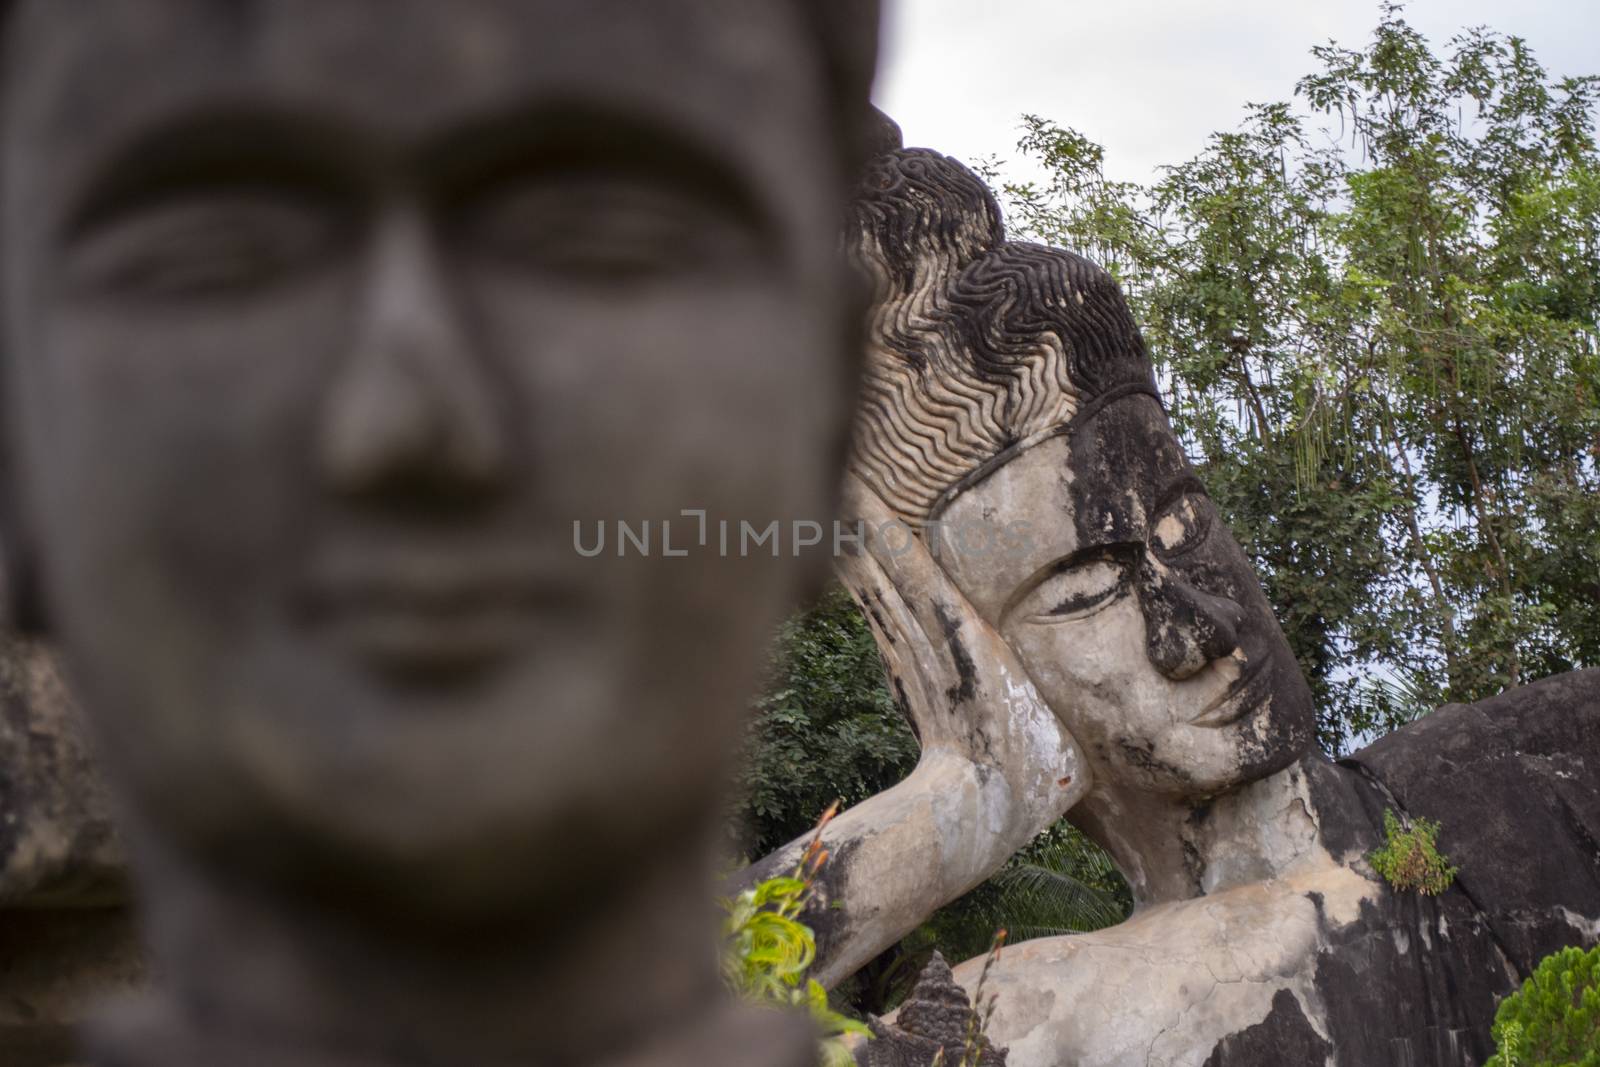 sculptures in Buddha Park or Xieng Khuan park, Vientiane, Laos by kb79